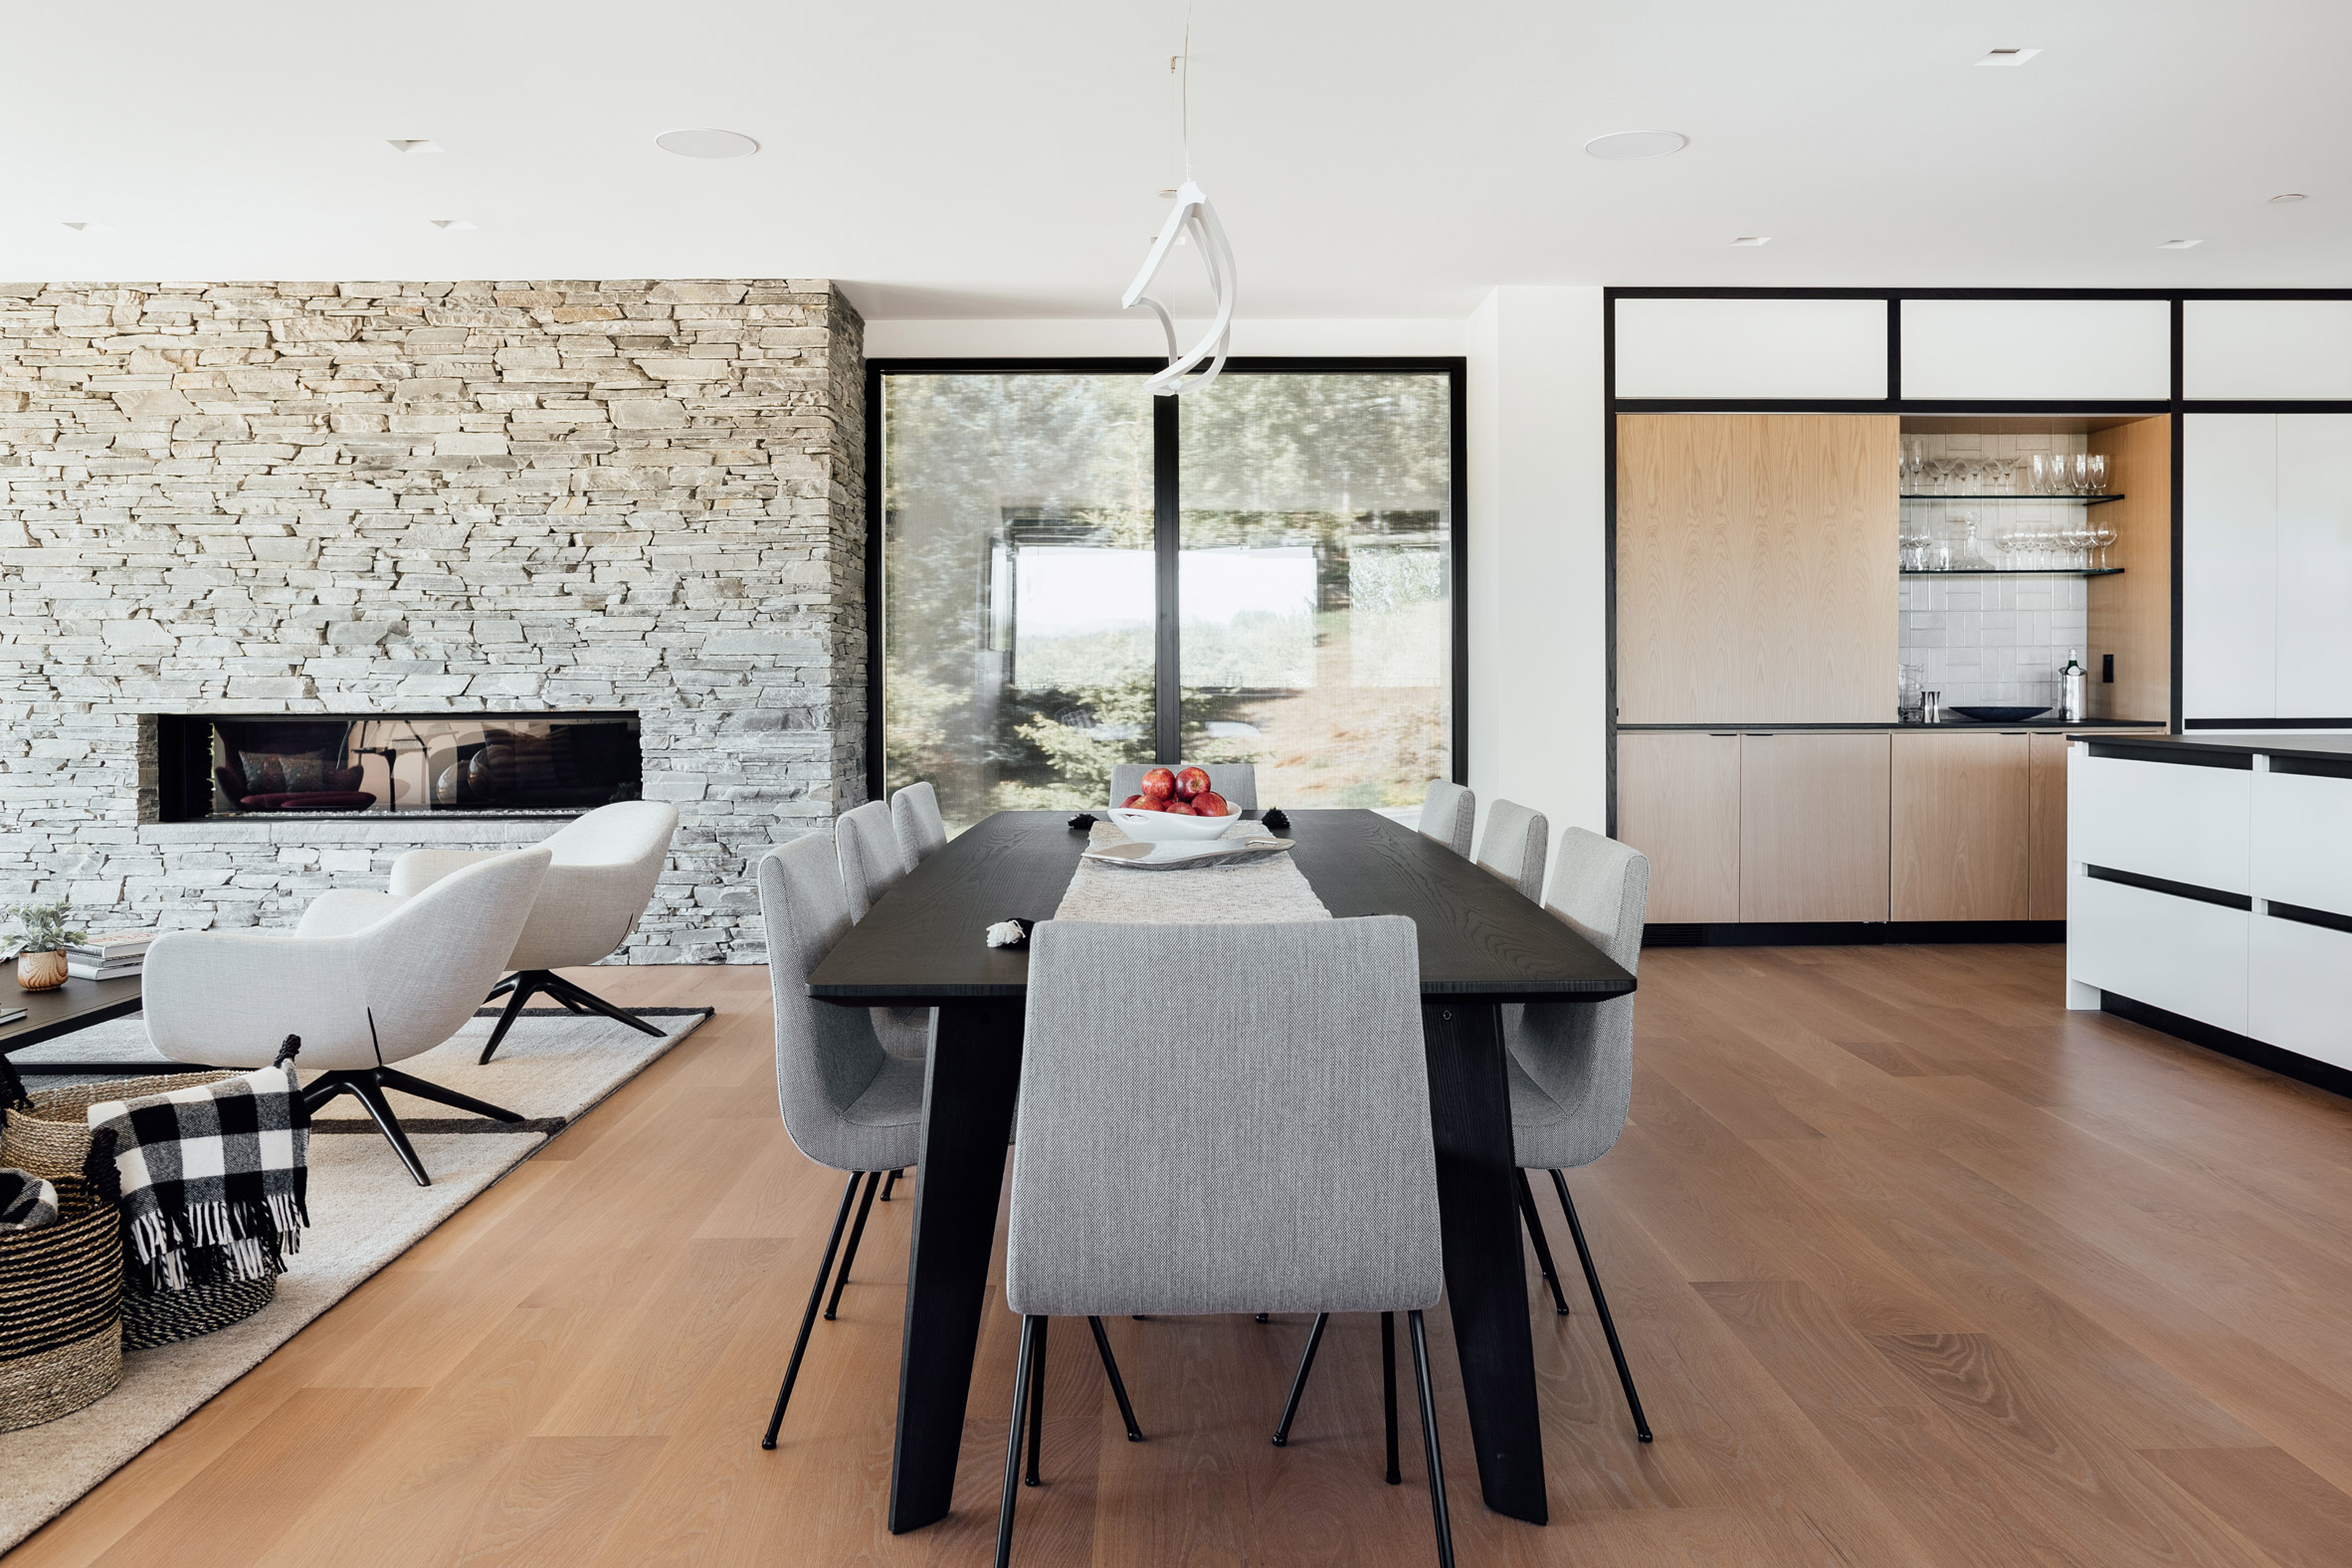 Dining table in Meadows Haus Utah Klima Architecture